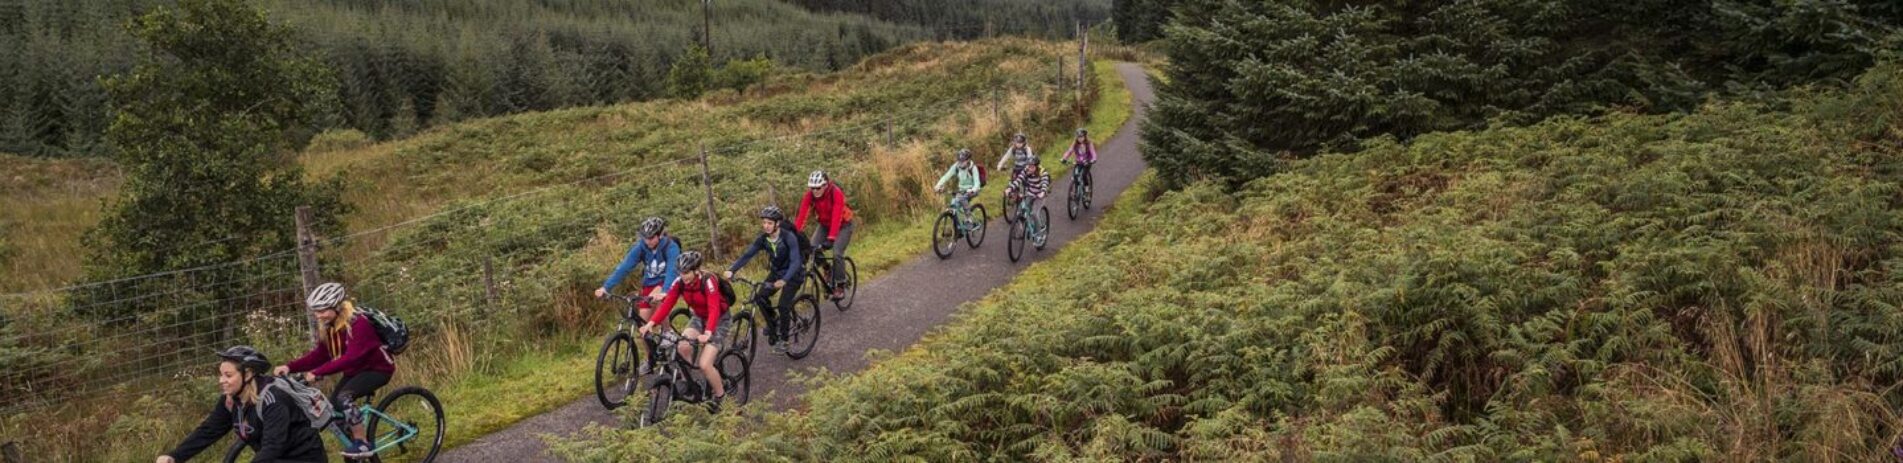 group-of-children-cycling-on-path-surrounded-by-trees-and-high-ferns